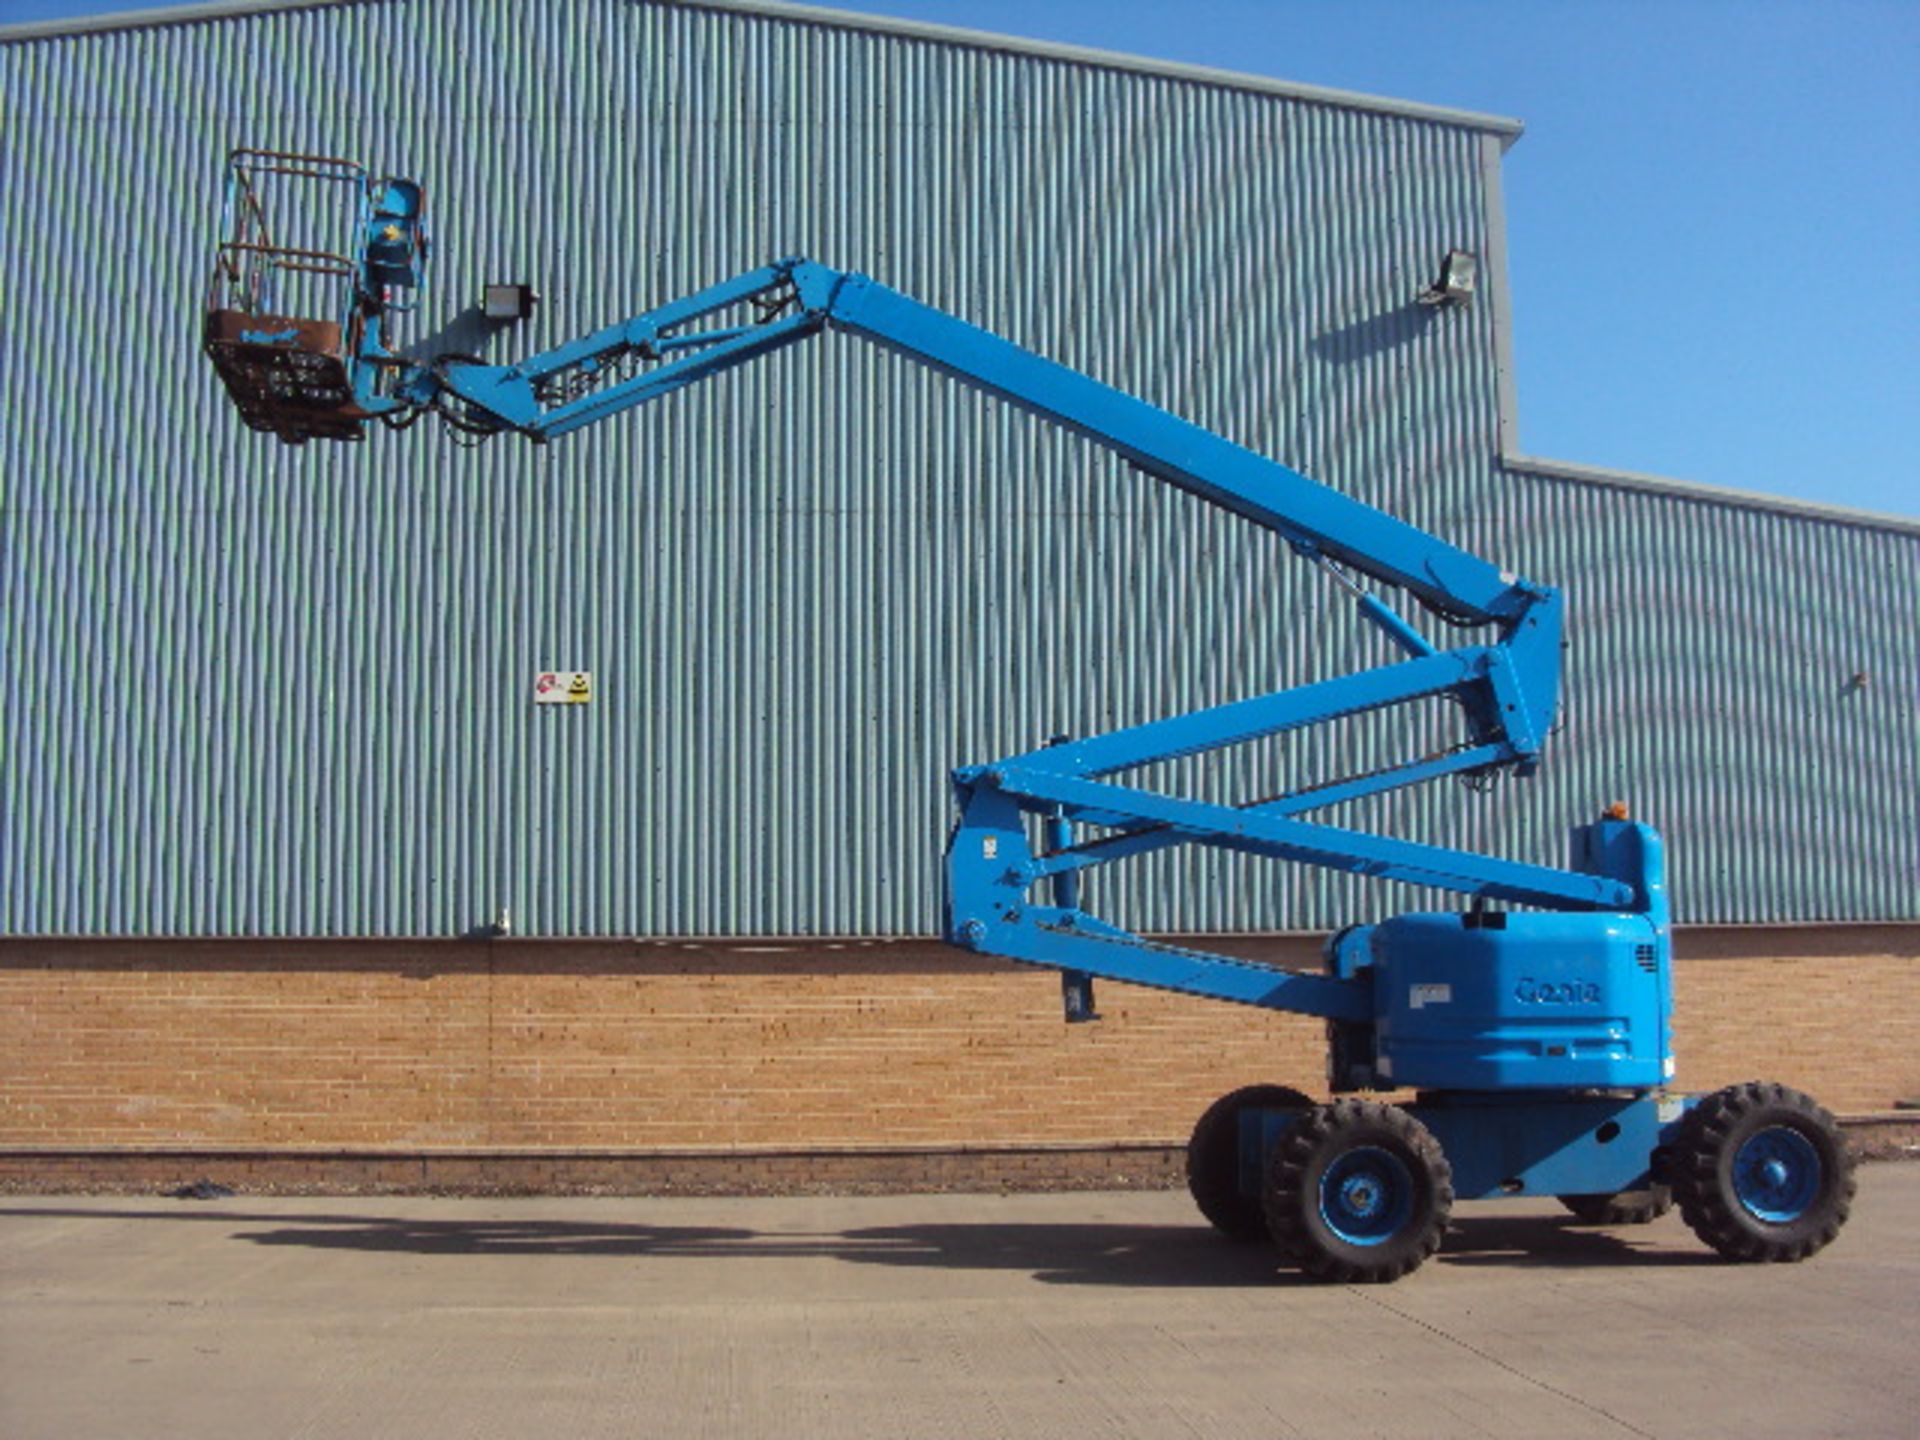 1999 GENIE Z60-34 60' 2wd articulated boom lift S/n: Z60-1983) (4991 recorded hours) (RDL) - Image 9 of 9